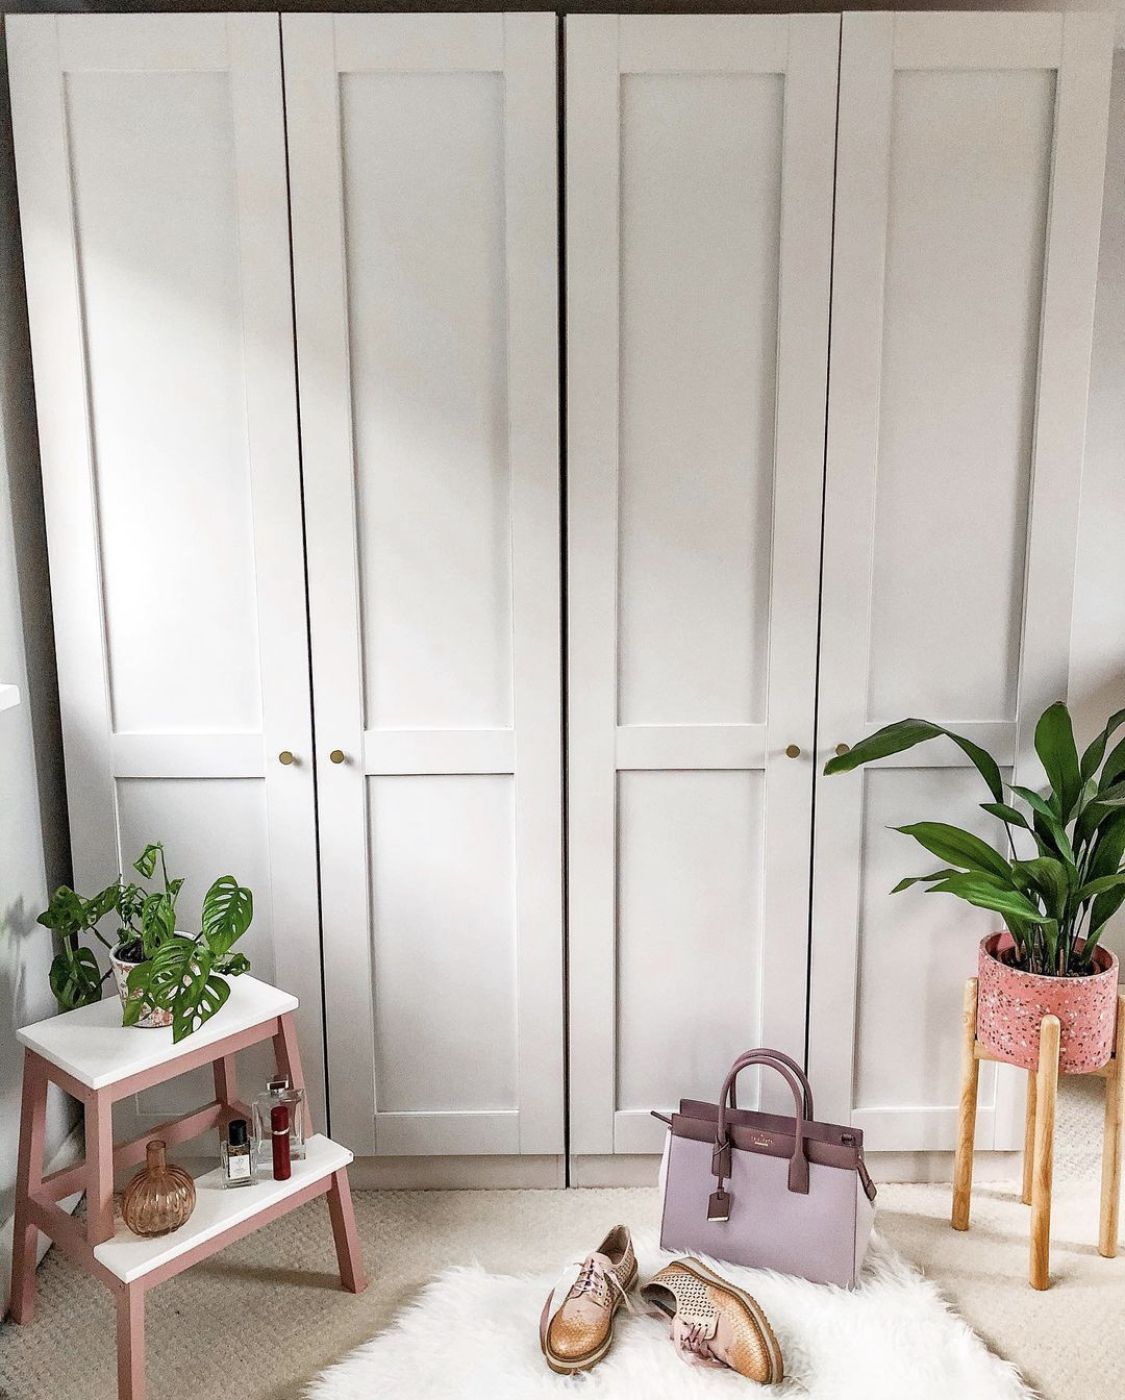 Our Budget Wardrobe Makeover For Under £35! – Boo & Maddie Inside Bargain Wardrobes (View 3 of 15)